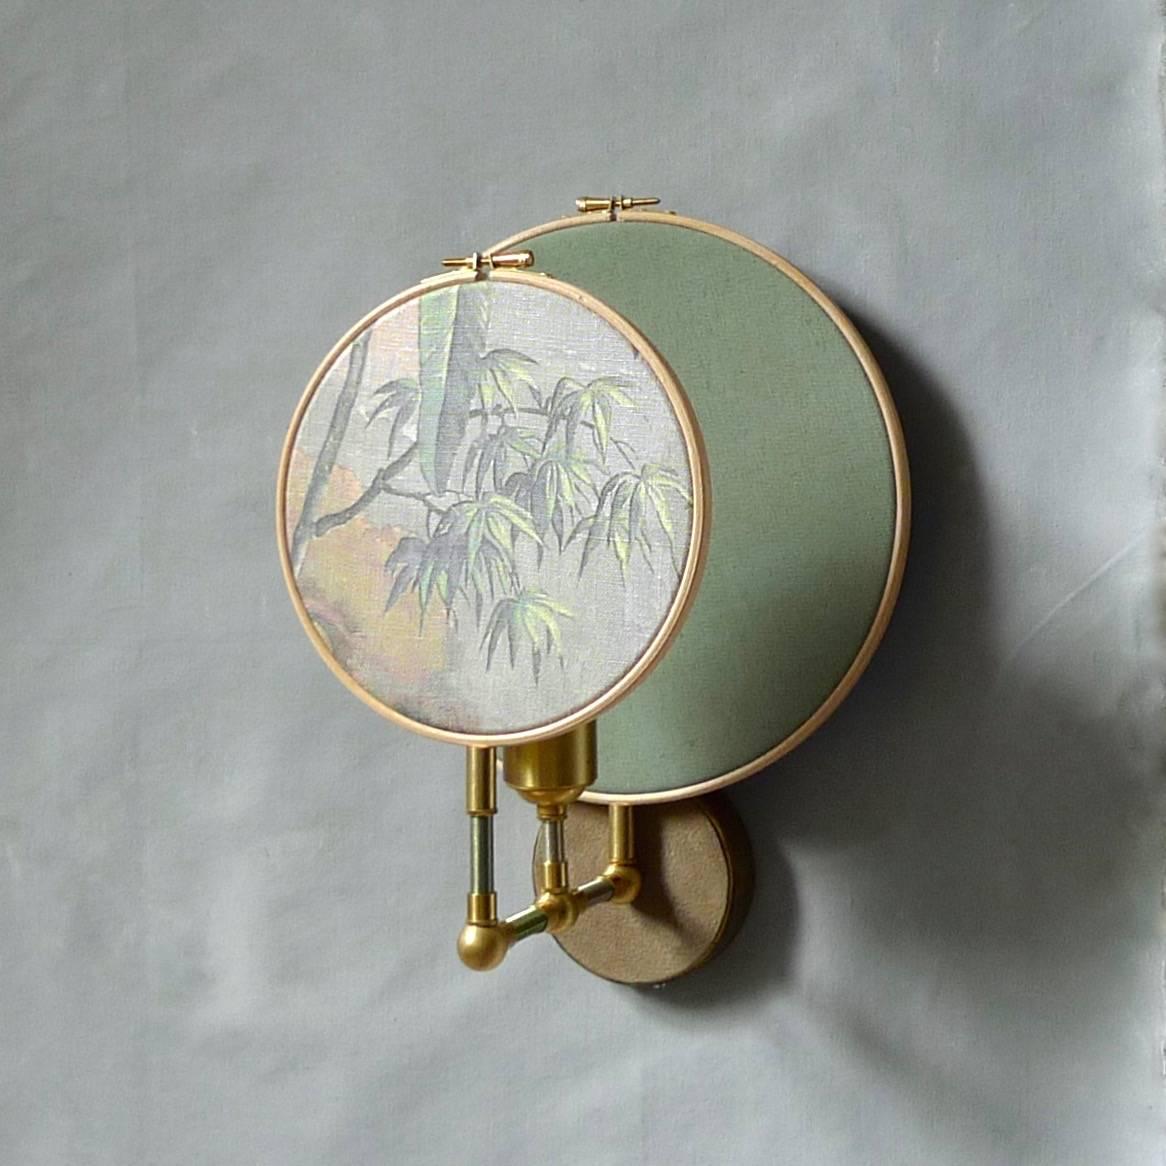 Circle Blue Grey Wall Sconce by Sander Bottinga.
Handmade in brass, leather, wood, and hand-printed and painted linen.
Dimensions: H 35 x W 27 x D 23 cm. 
(A dimmer is inlaid with leather. It is also possible to produce the piece without a